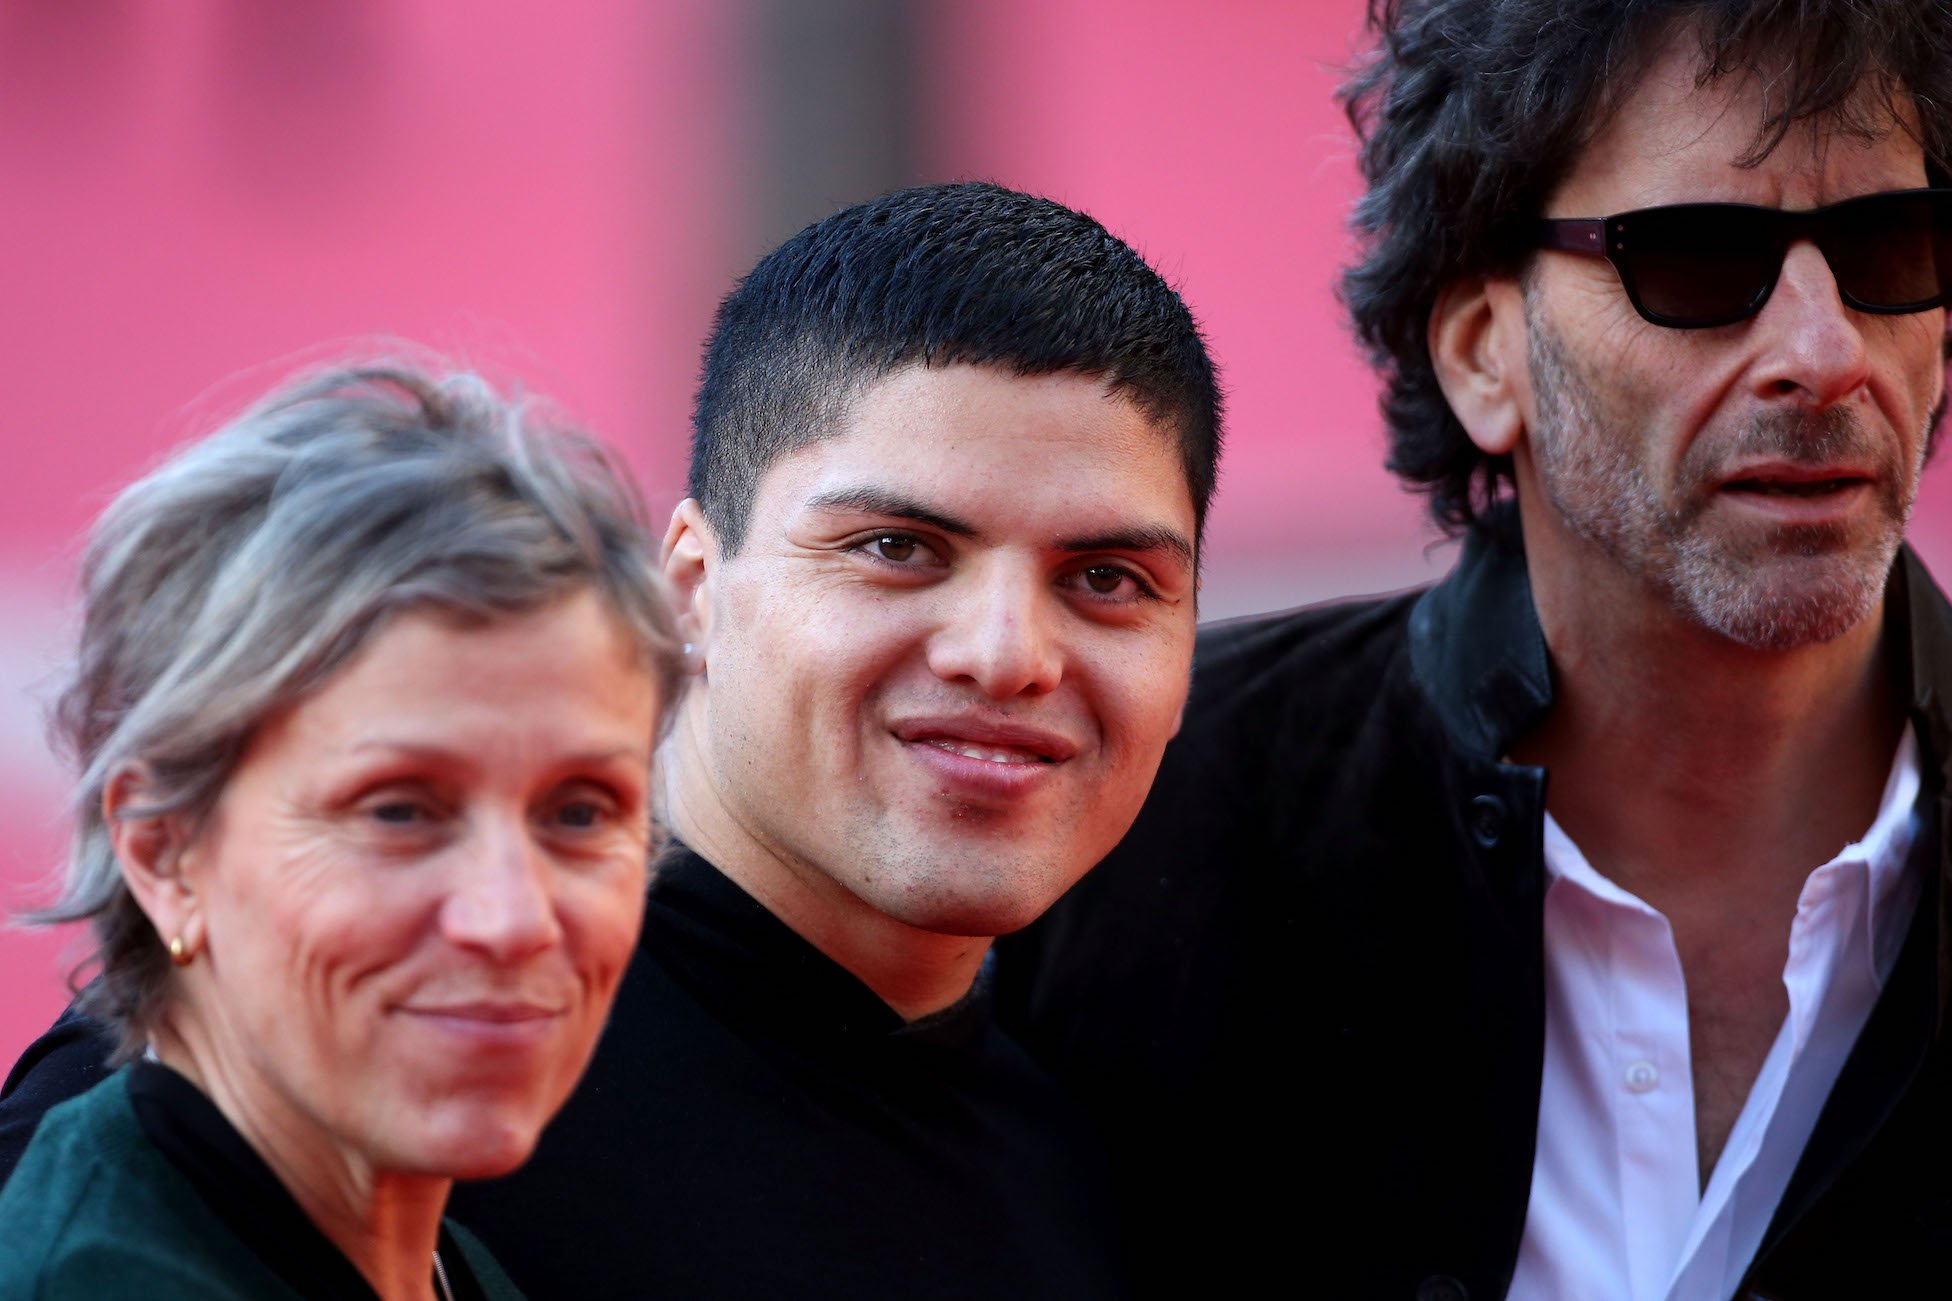 Frances McDormand, her son, and her husband, Joel Coen, standing together at an event